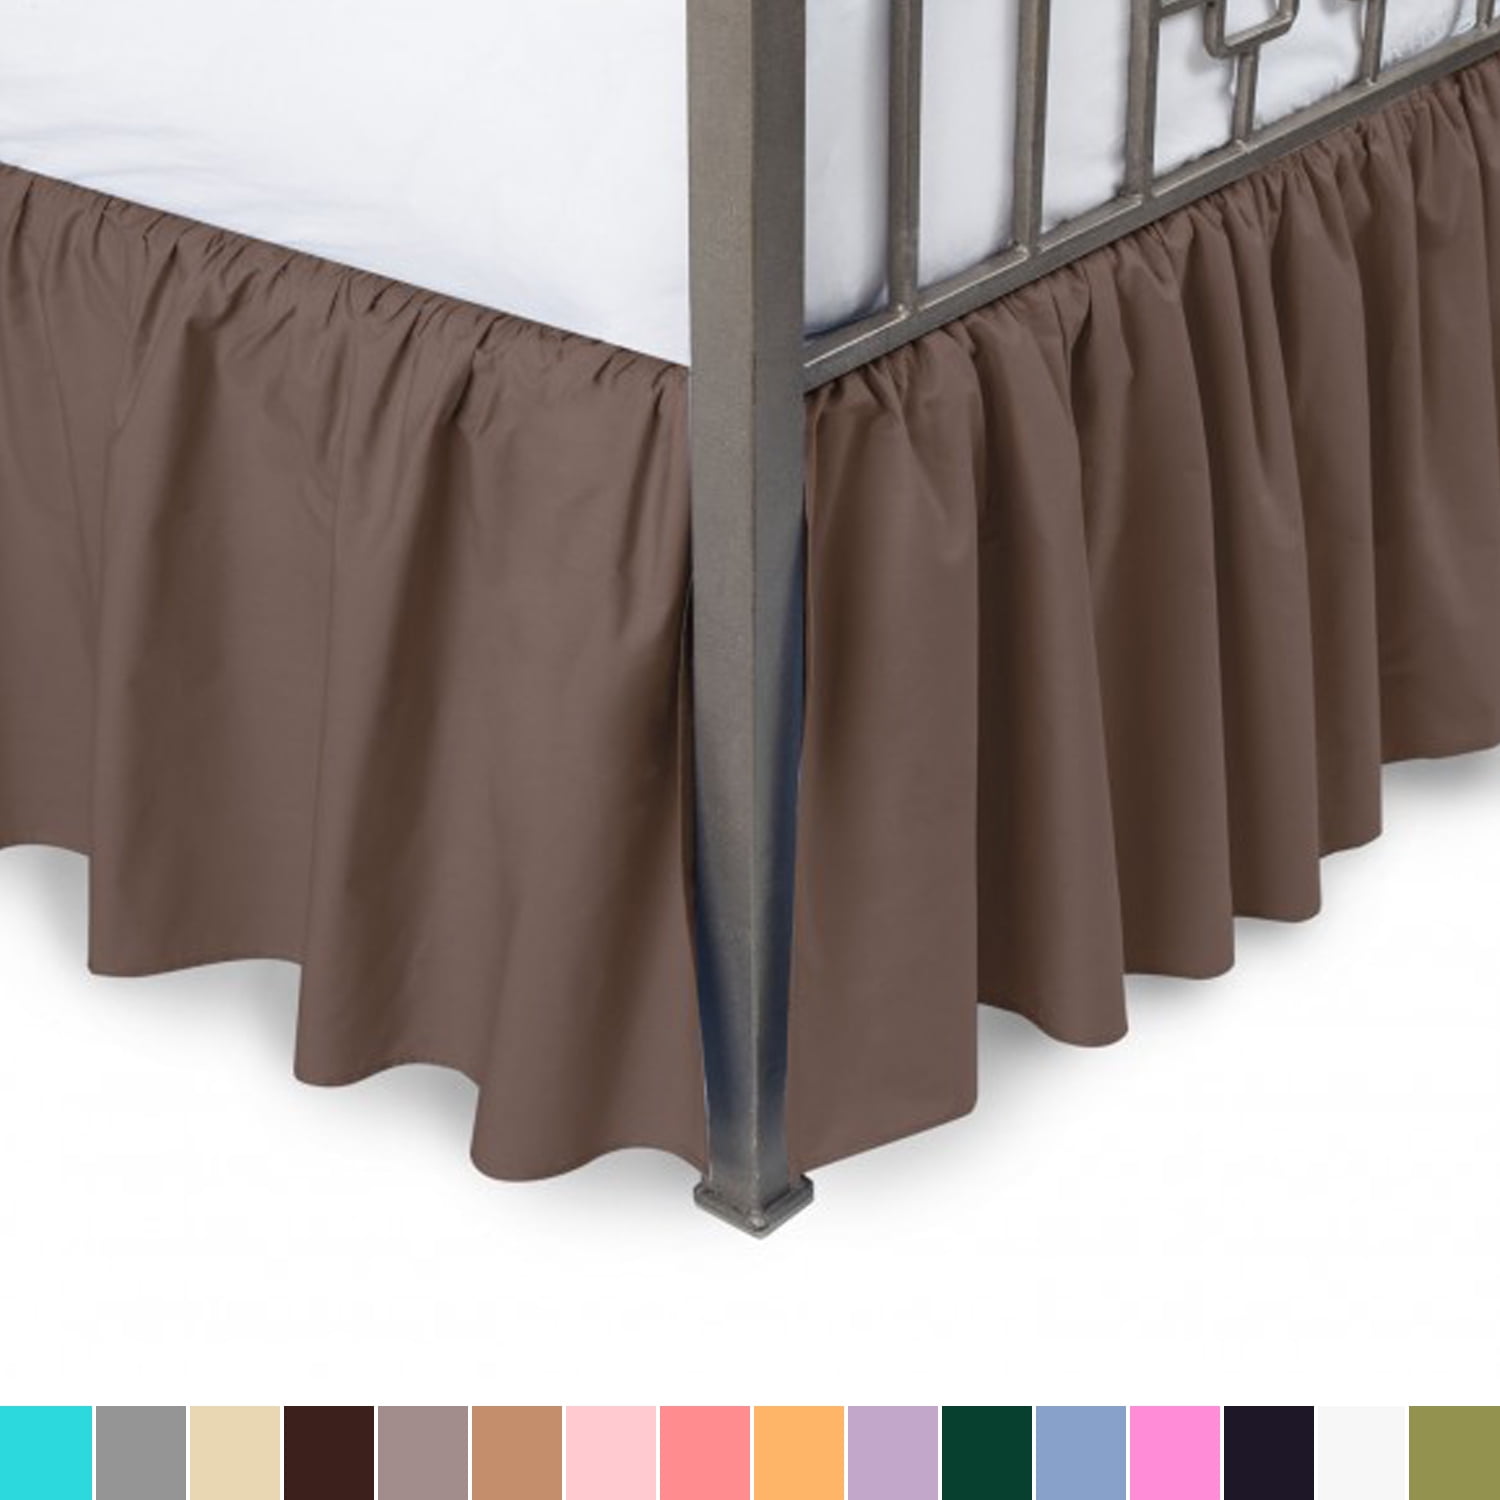 Ruffled Bed Skirt with Split Corners - Twin, Brown, 21" Drop Dust